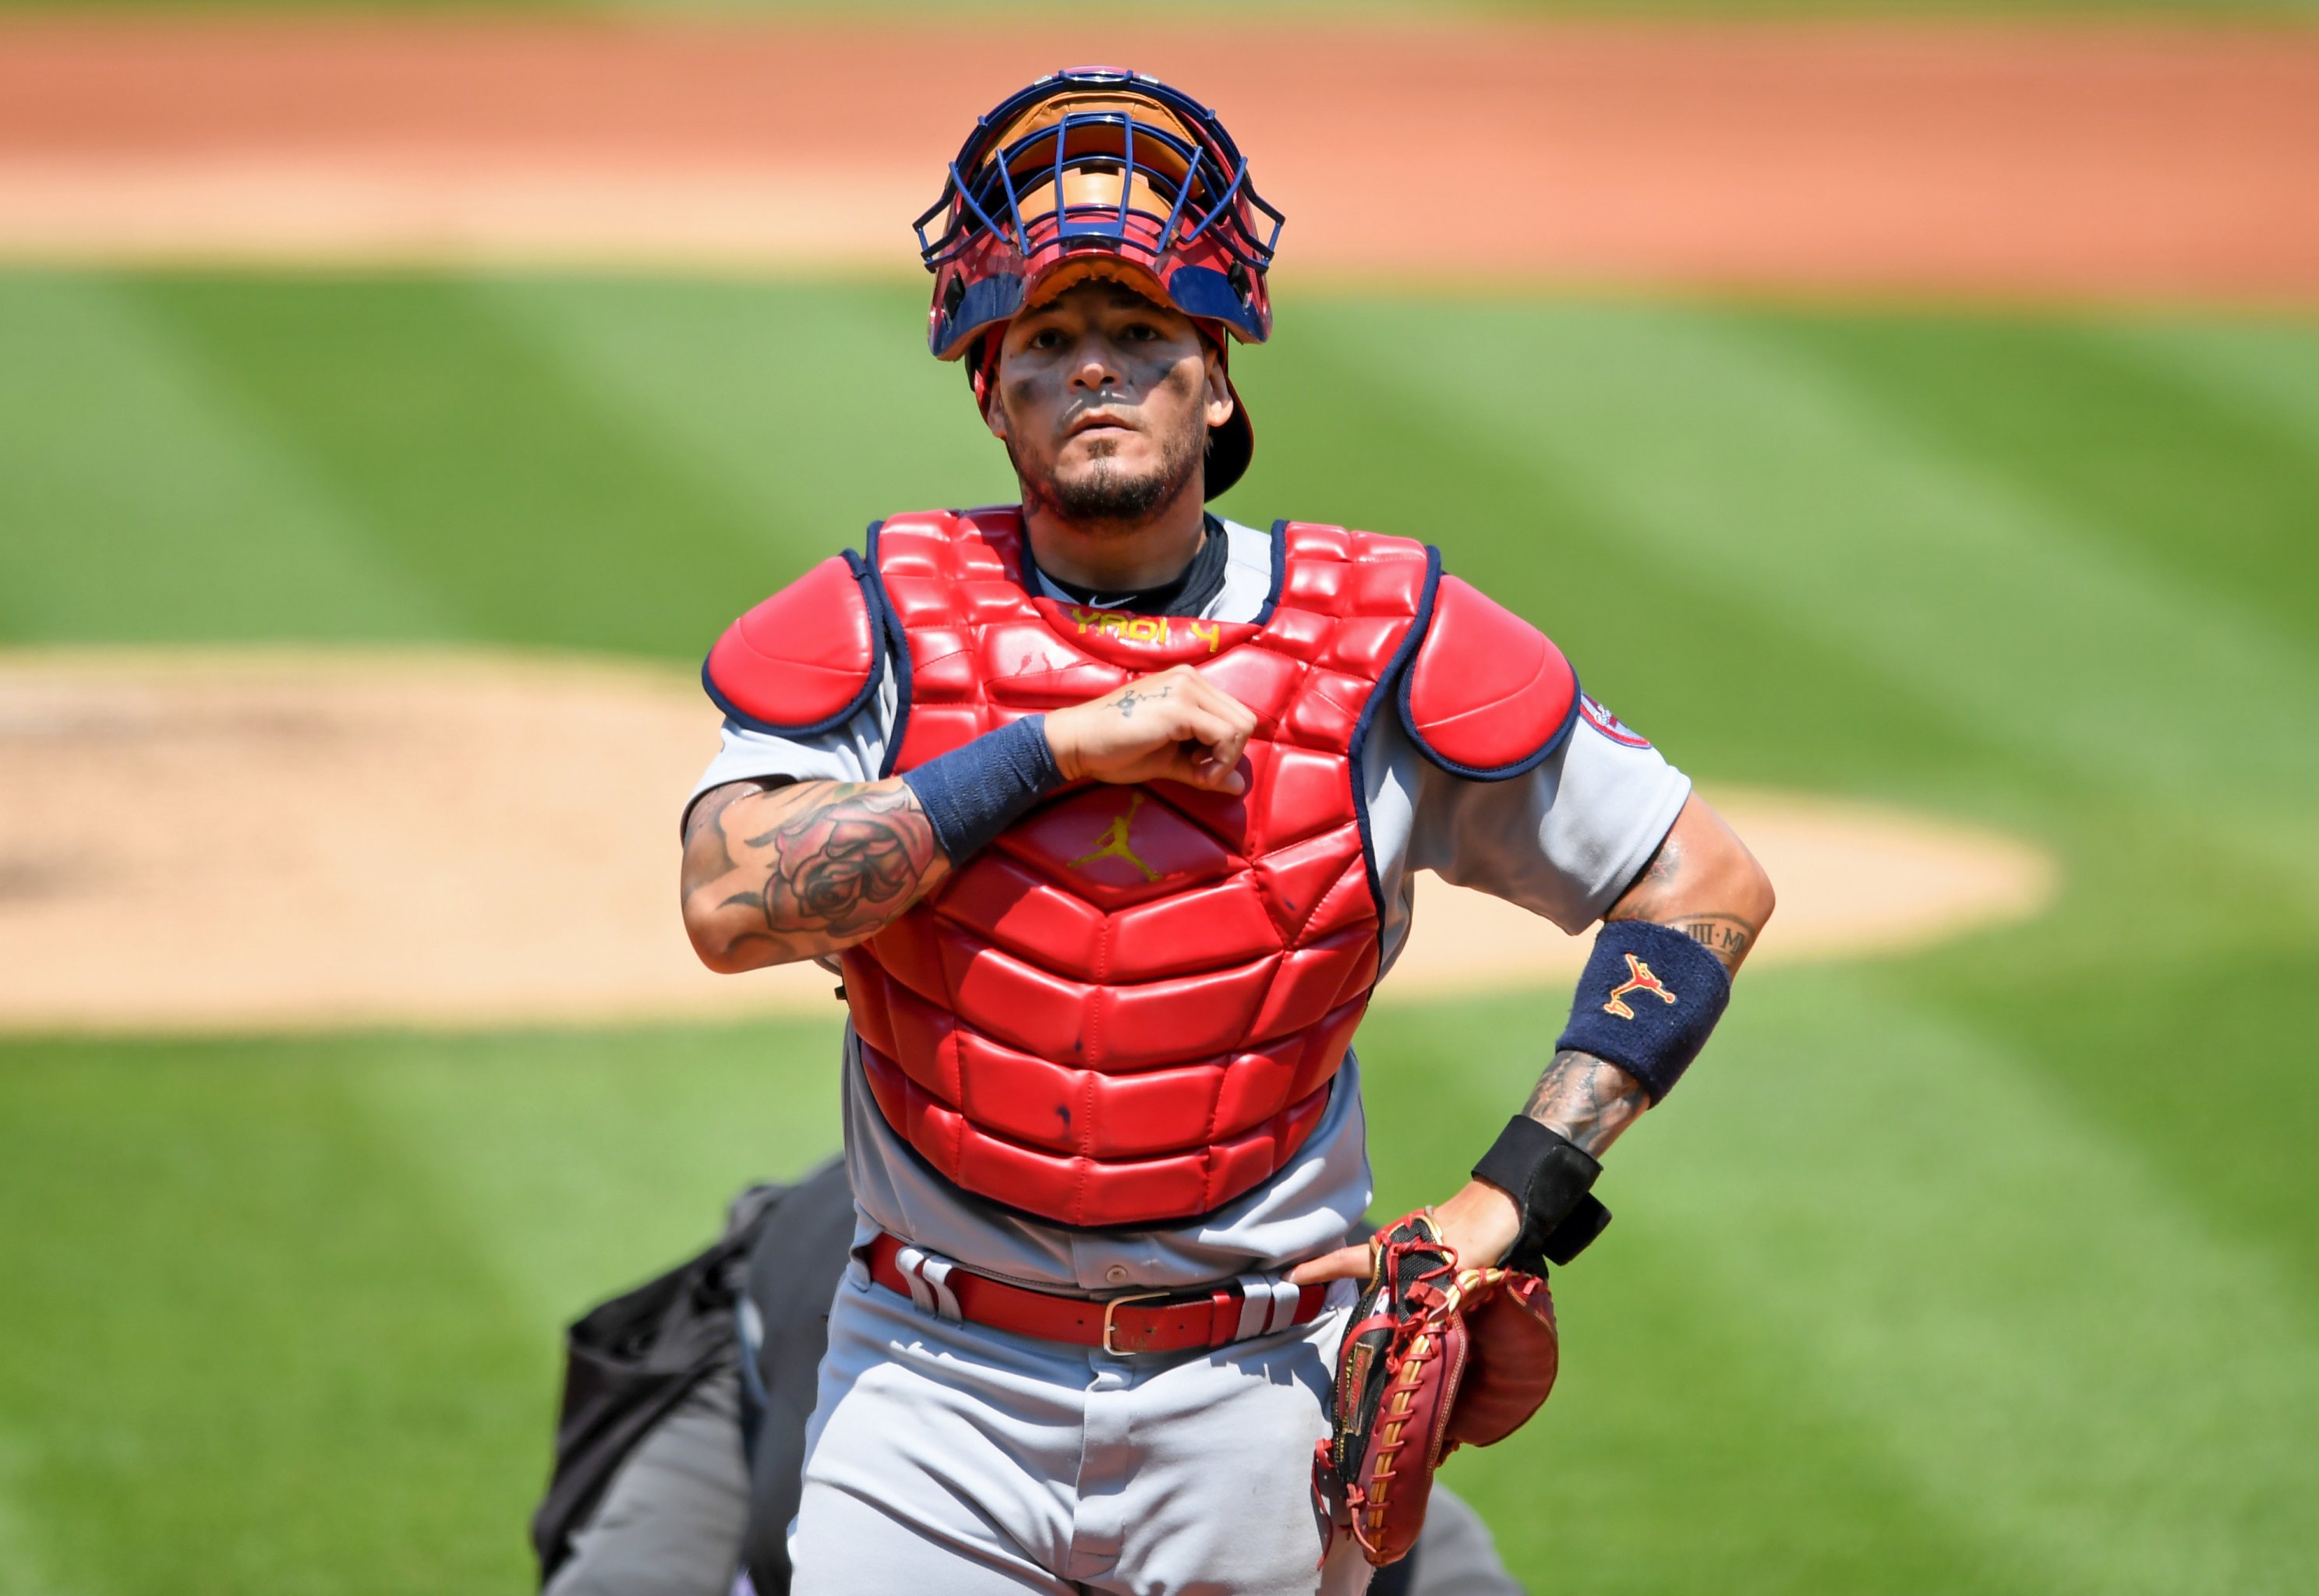 Baseball Bros on X: Yadier Molina's pink catchers gear for